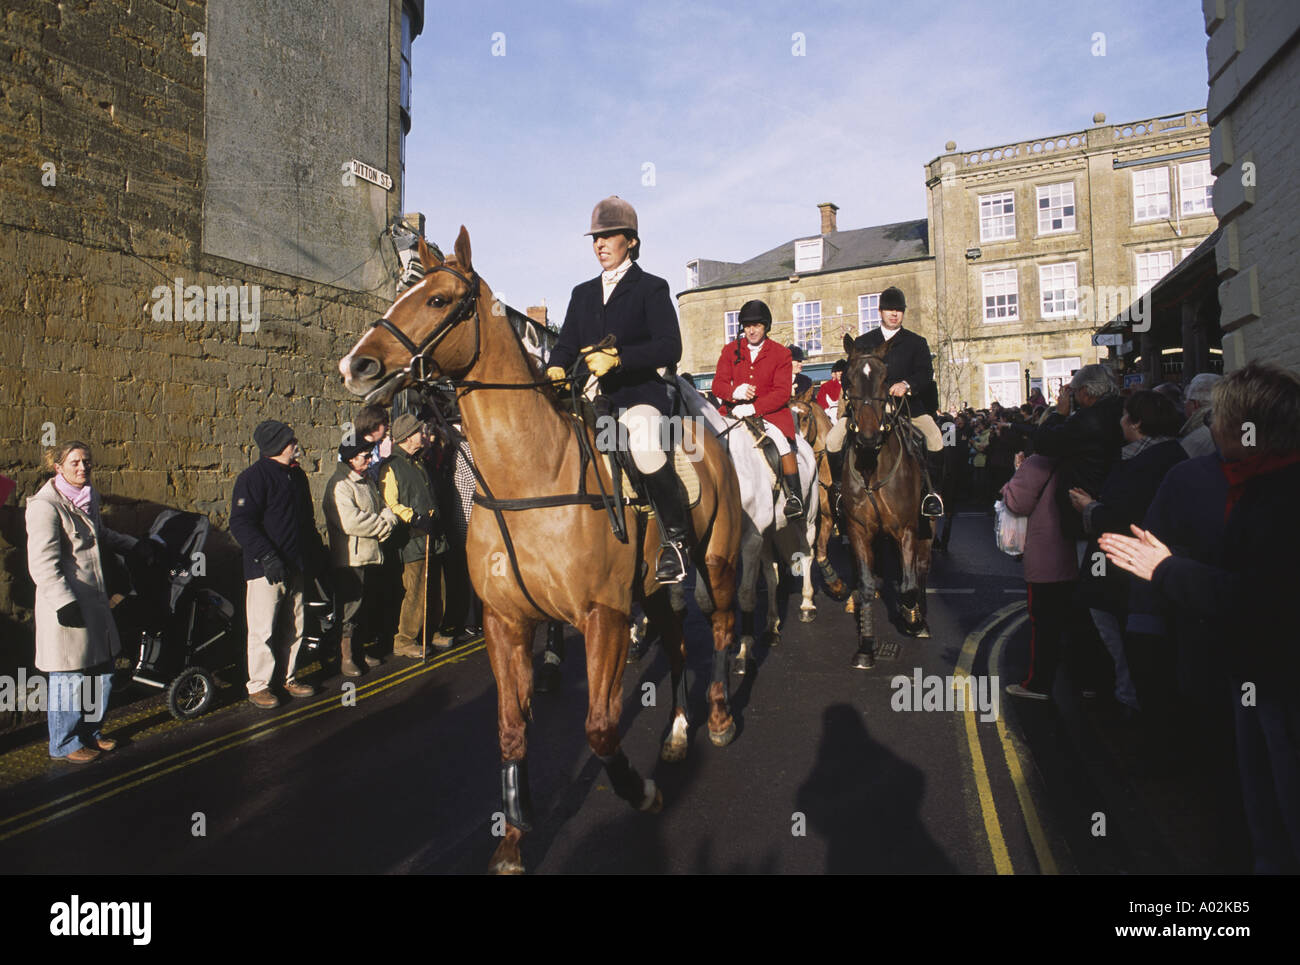 Riders gather on Boxing Day in the market town of Ilminster Somerset Stock Photo